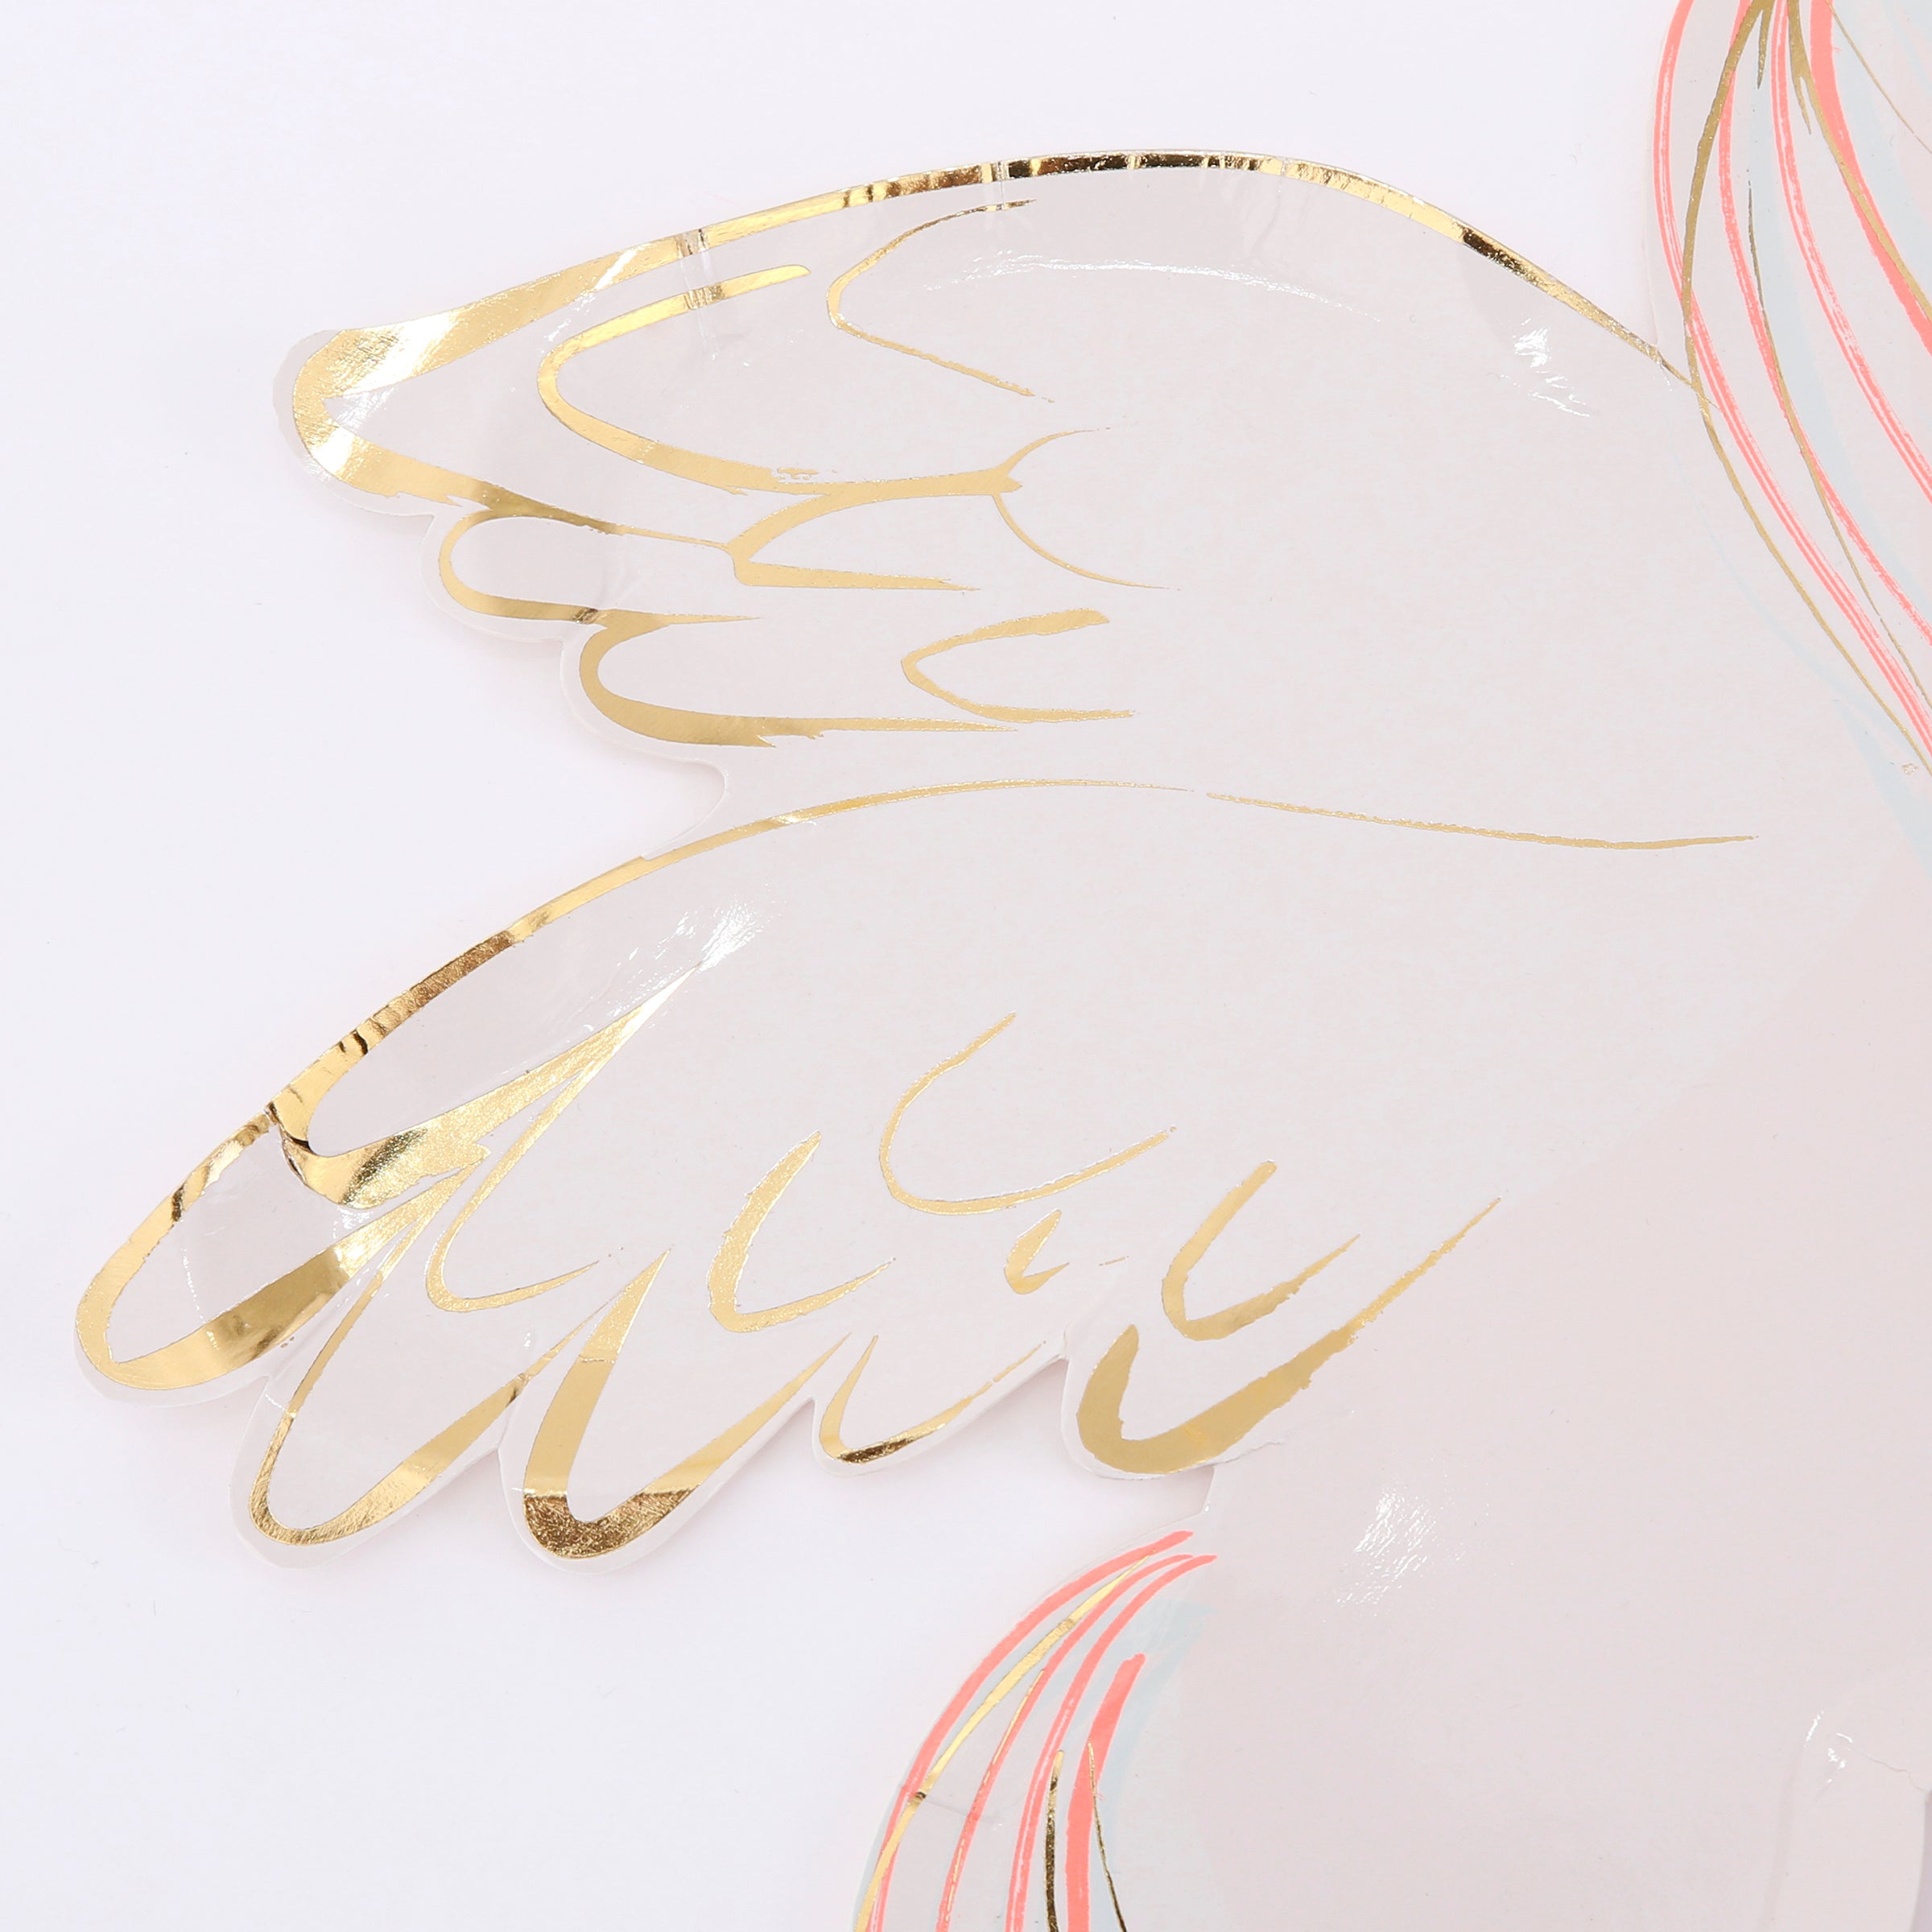 These delightful plates feature a winged unicorn with shimmering gold foil detail.